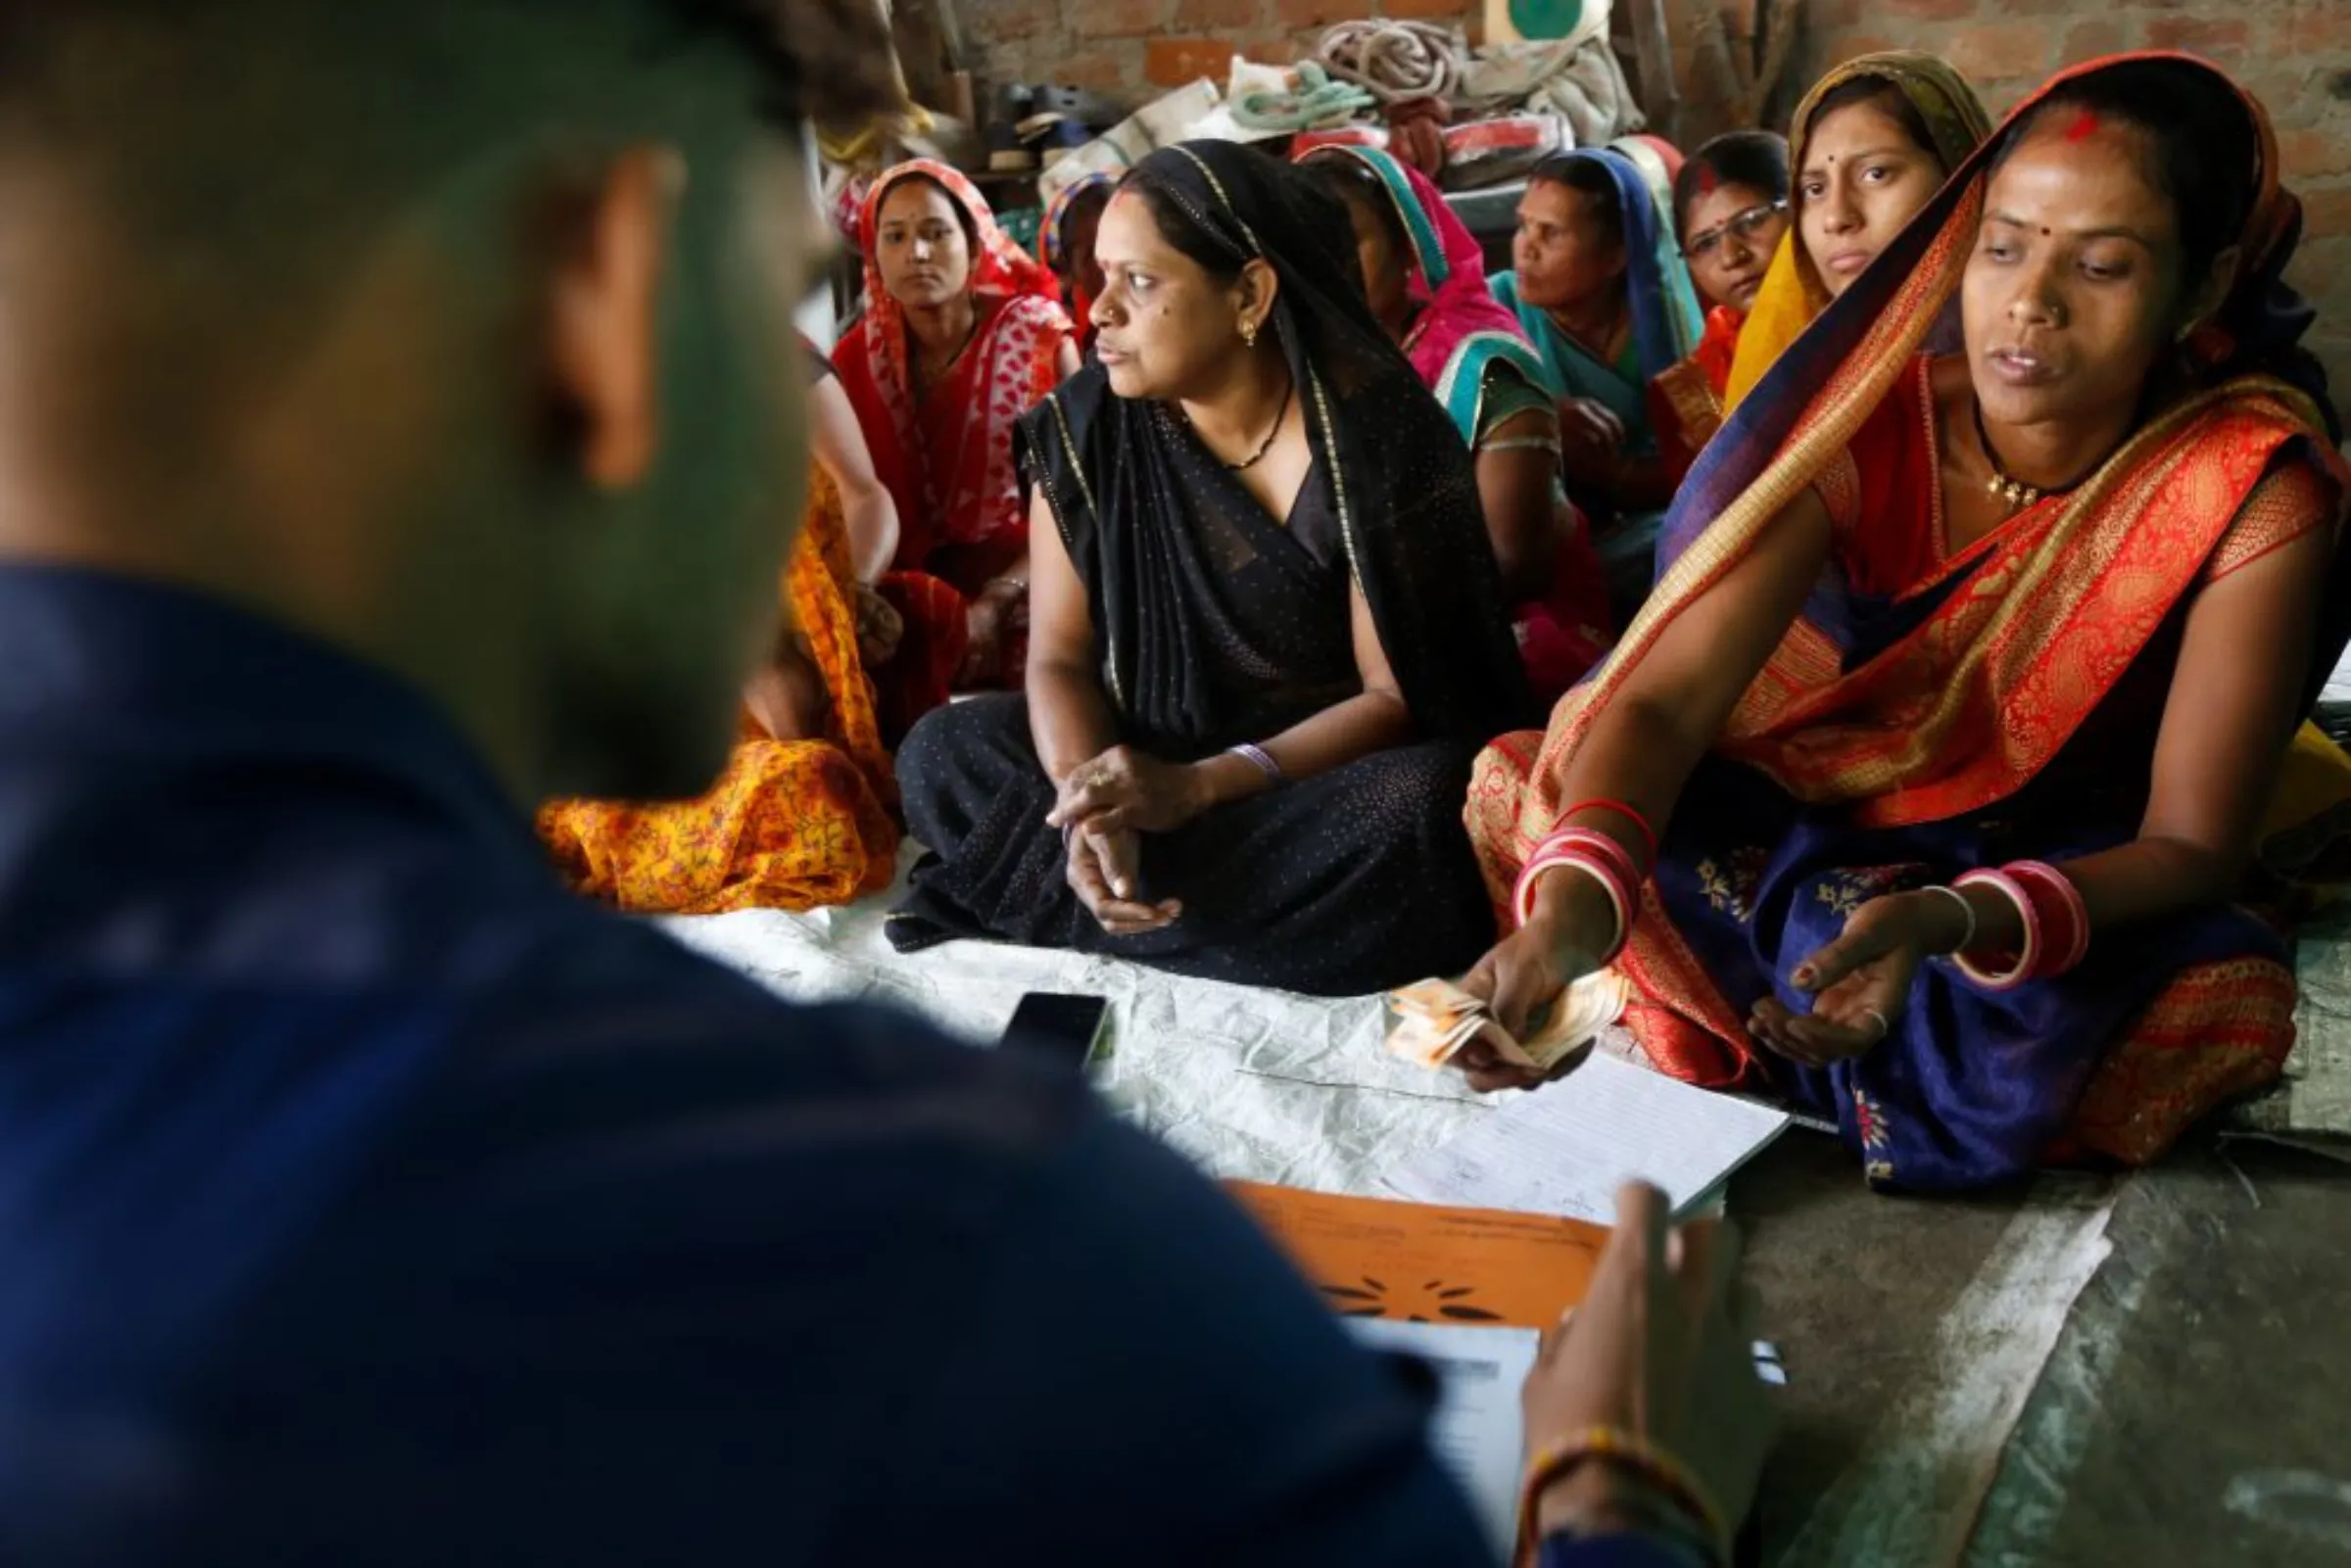 A woman borrower hands over her loan installment to a worker from microfinance company Spandana Sphoorty Financial Limited in her village Narela, Madhya Pradesh, November 10, 2022